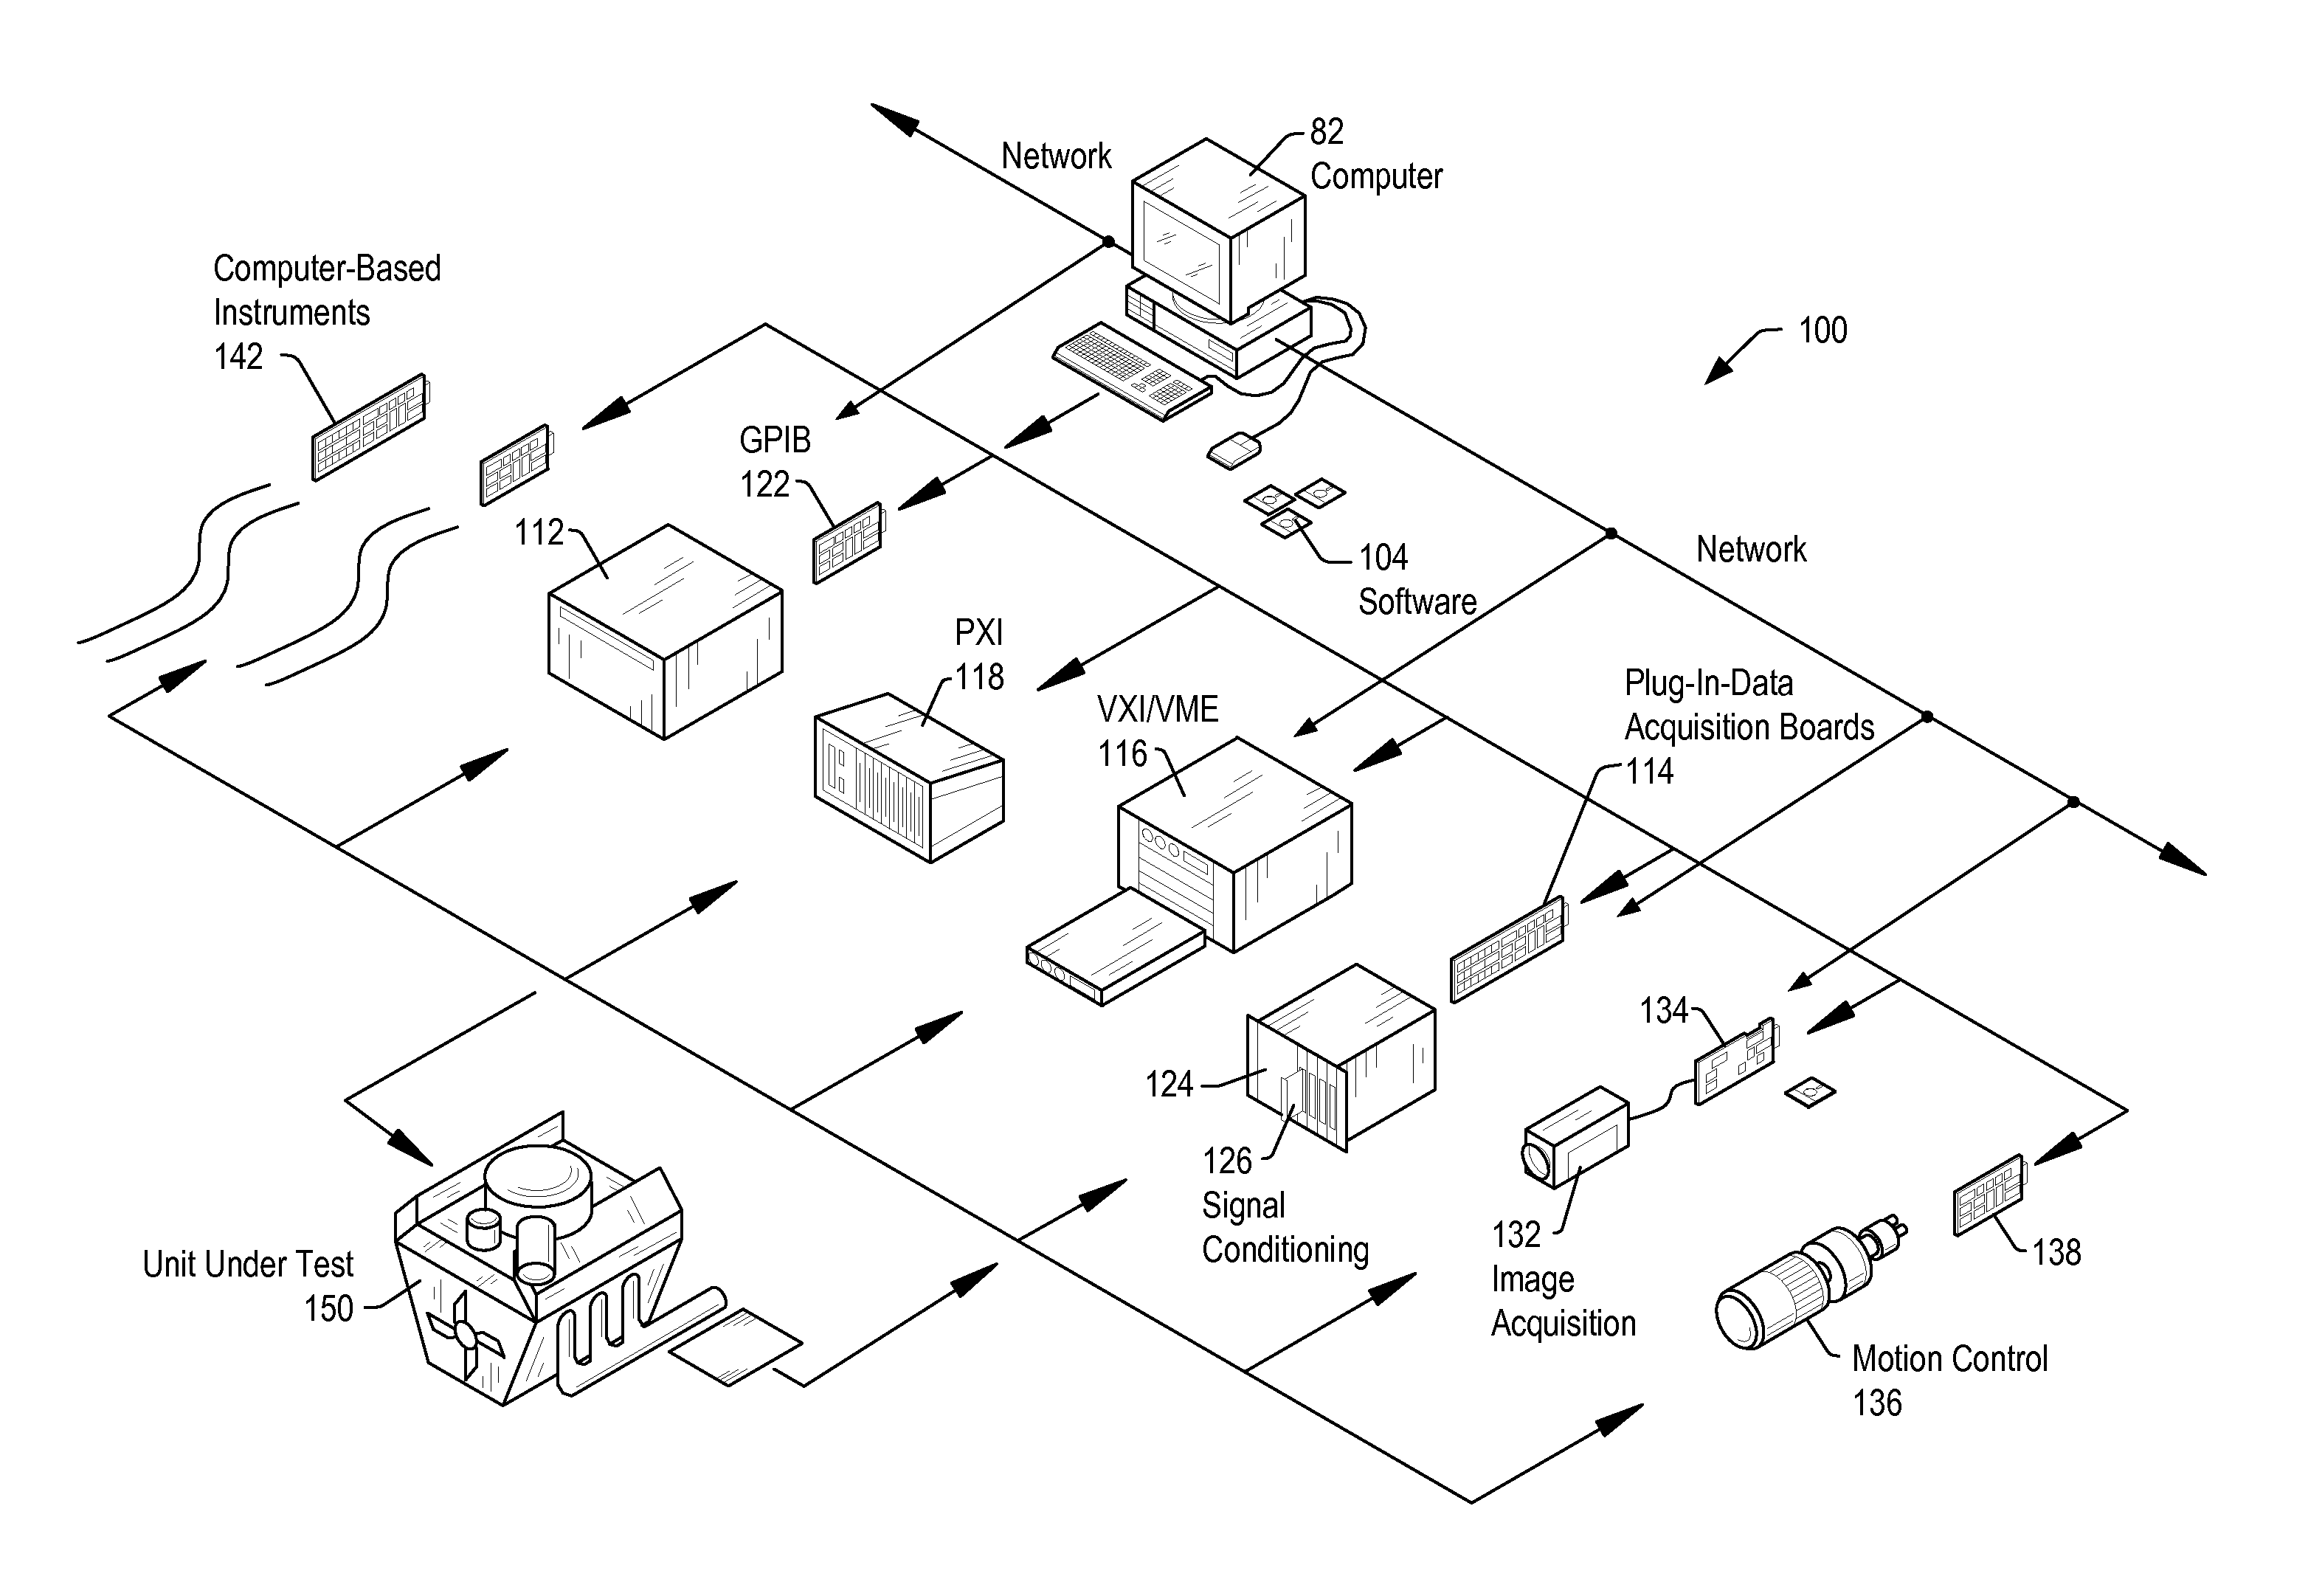 Packet Routing Based on Packet Type in Peripheral Component Interconnect Express Bus Systems